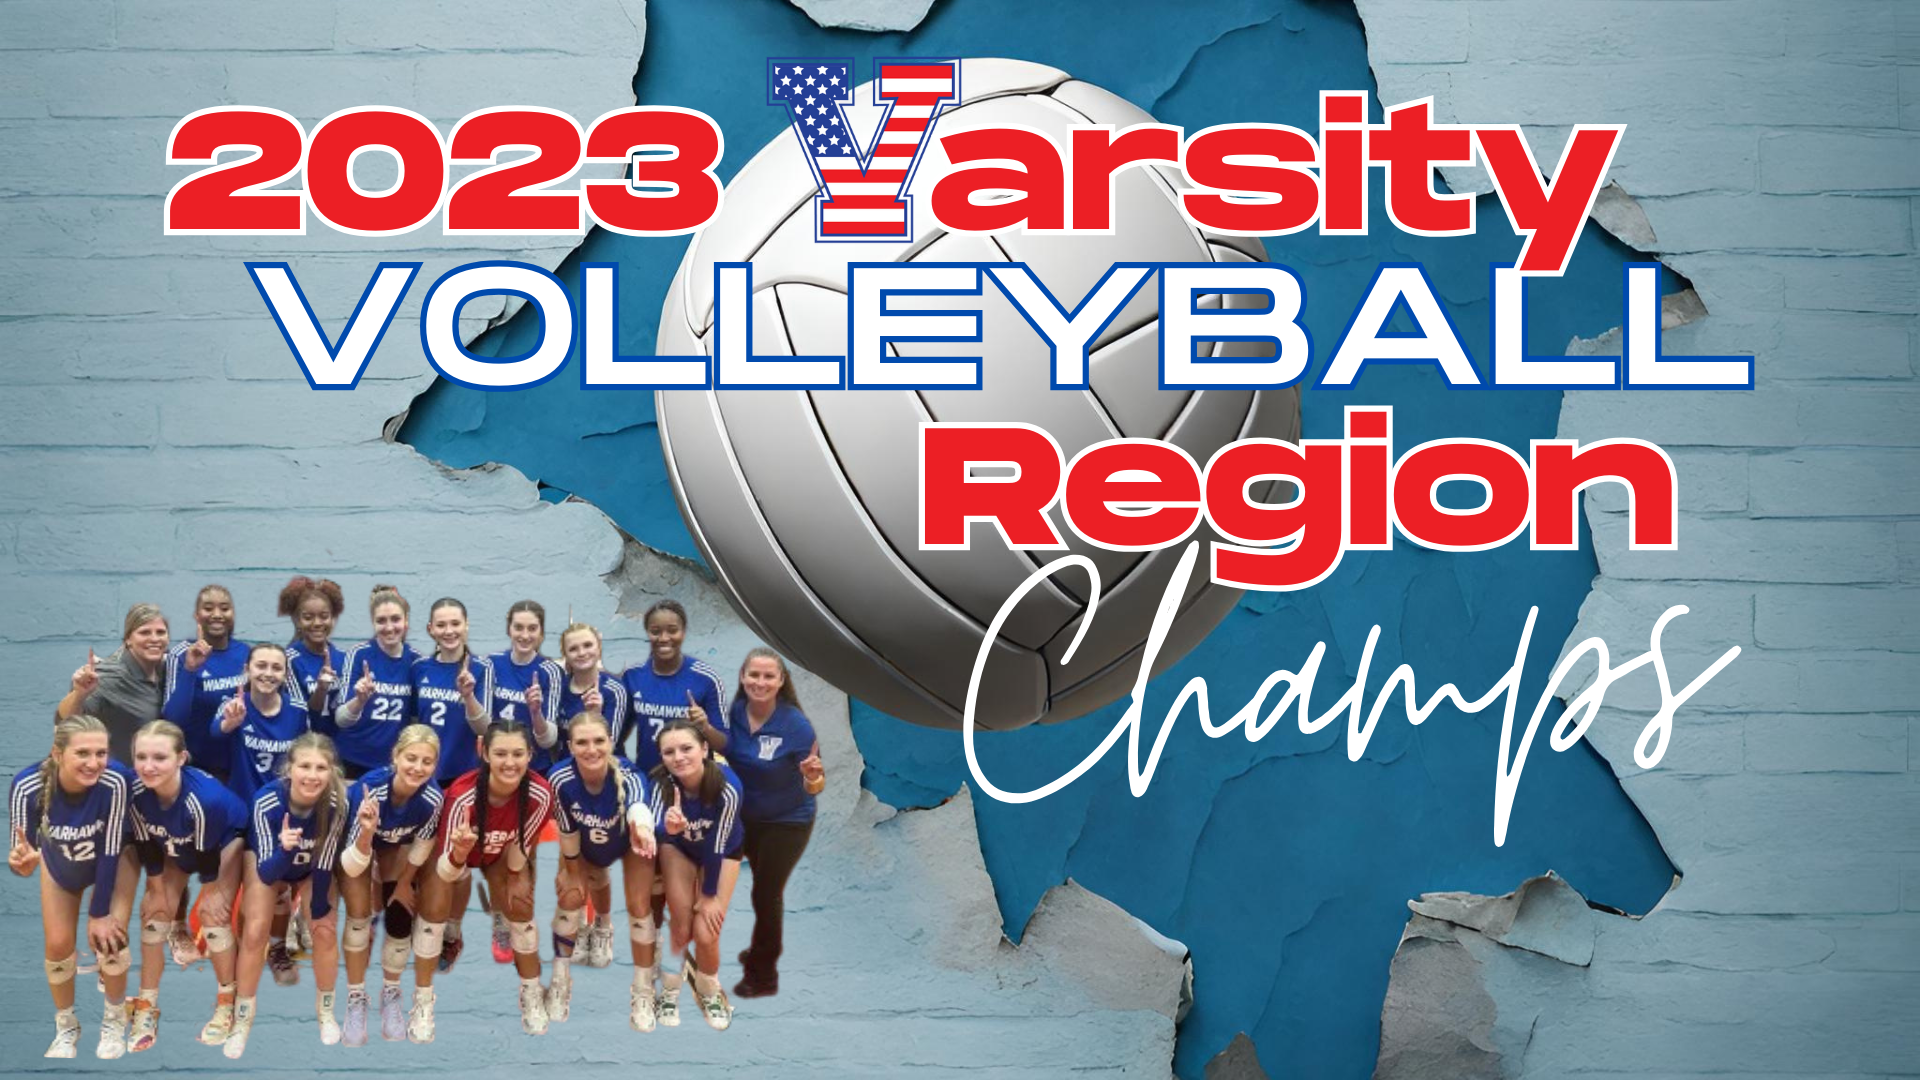 Volleyball Region Champs 2023